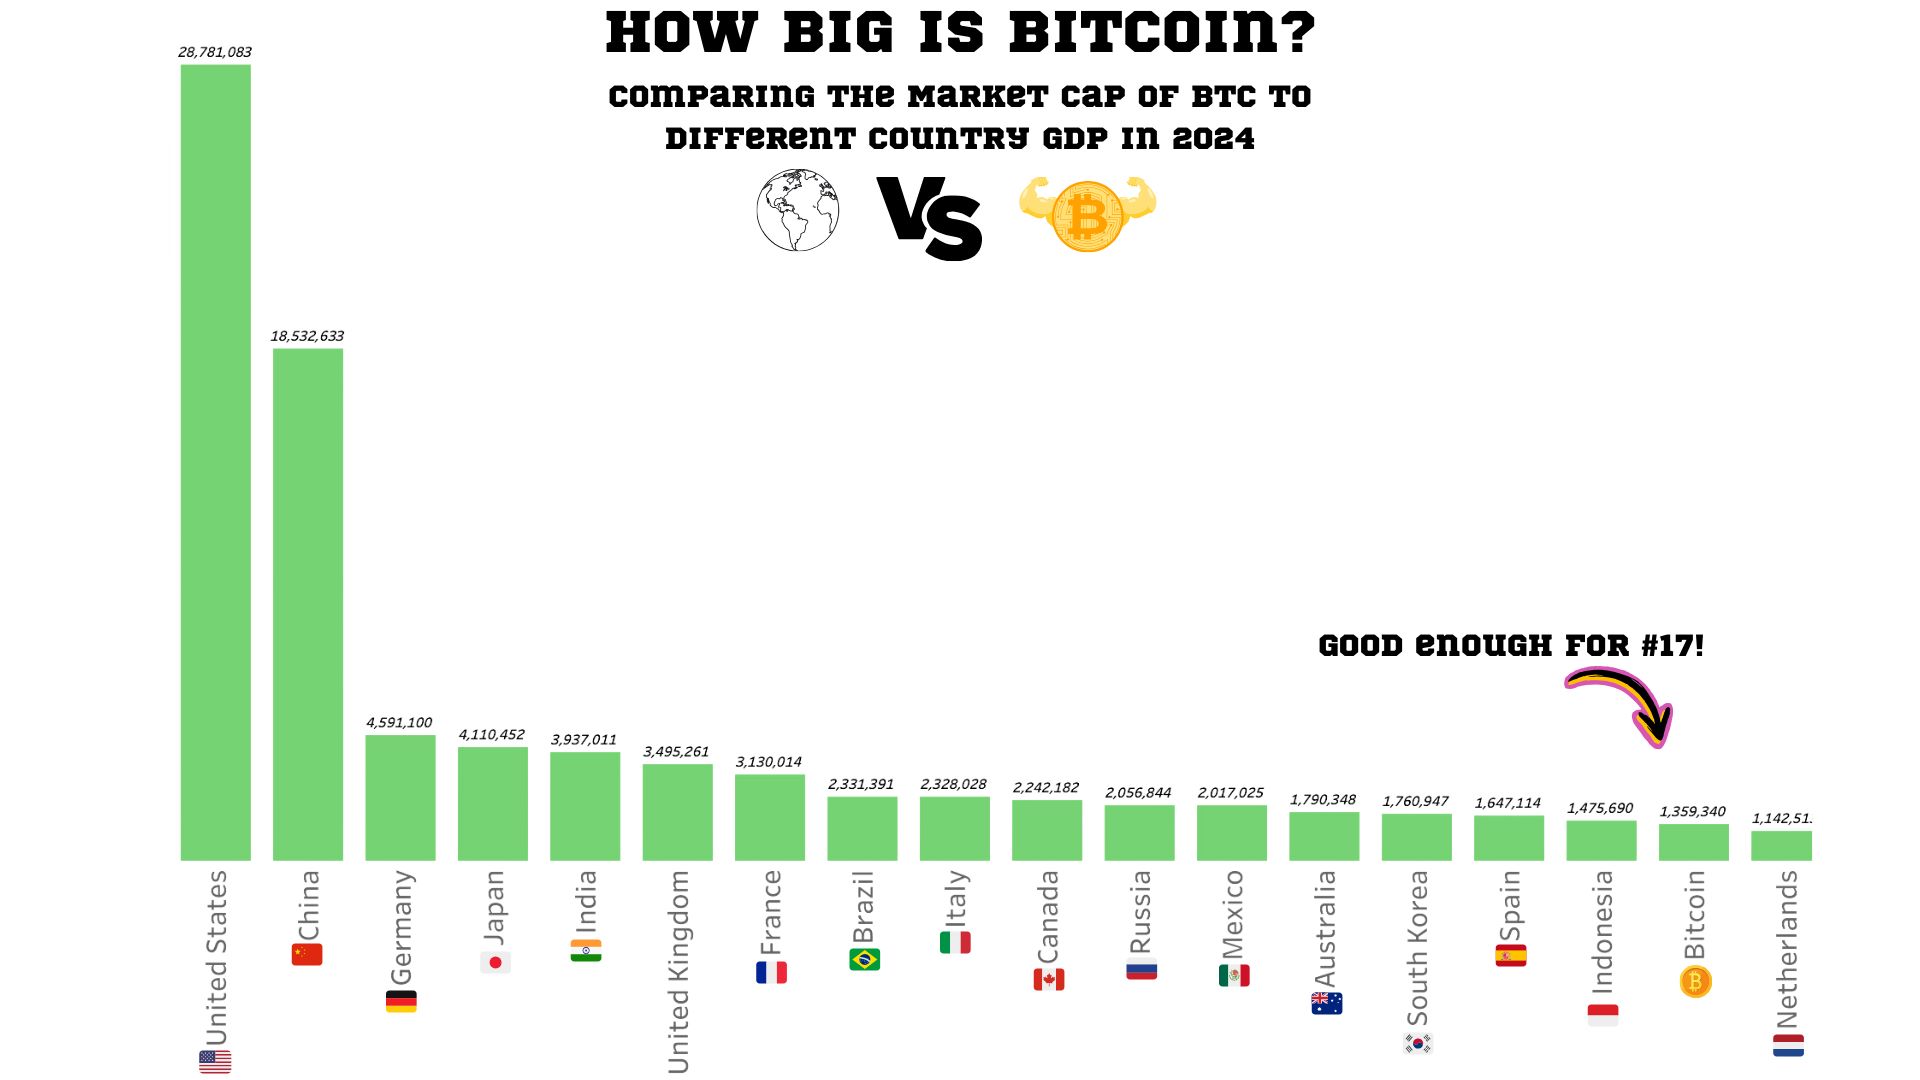 Bar chart comparing the market cap of Bitcoin to the GDPs of various countries